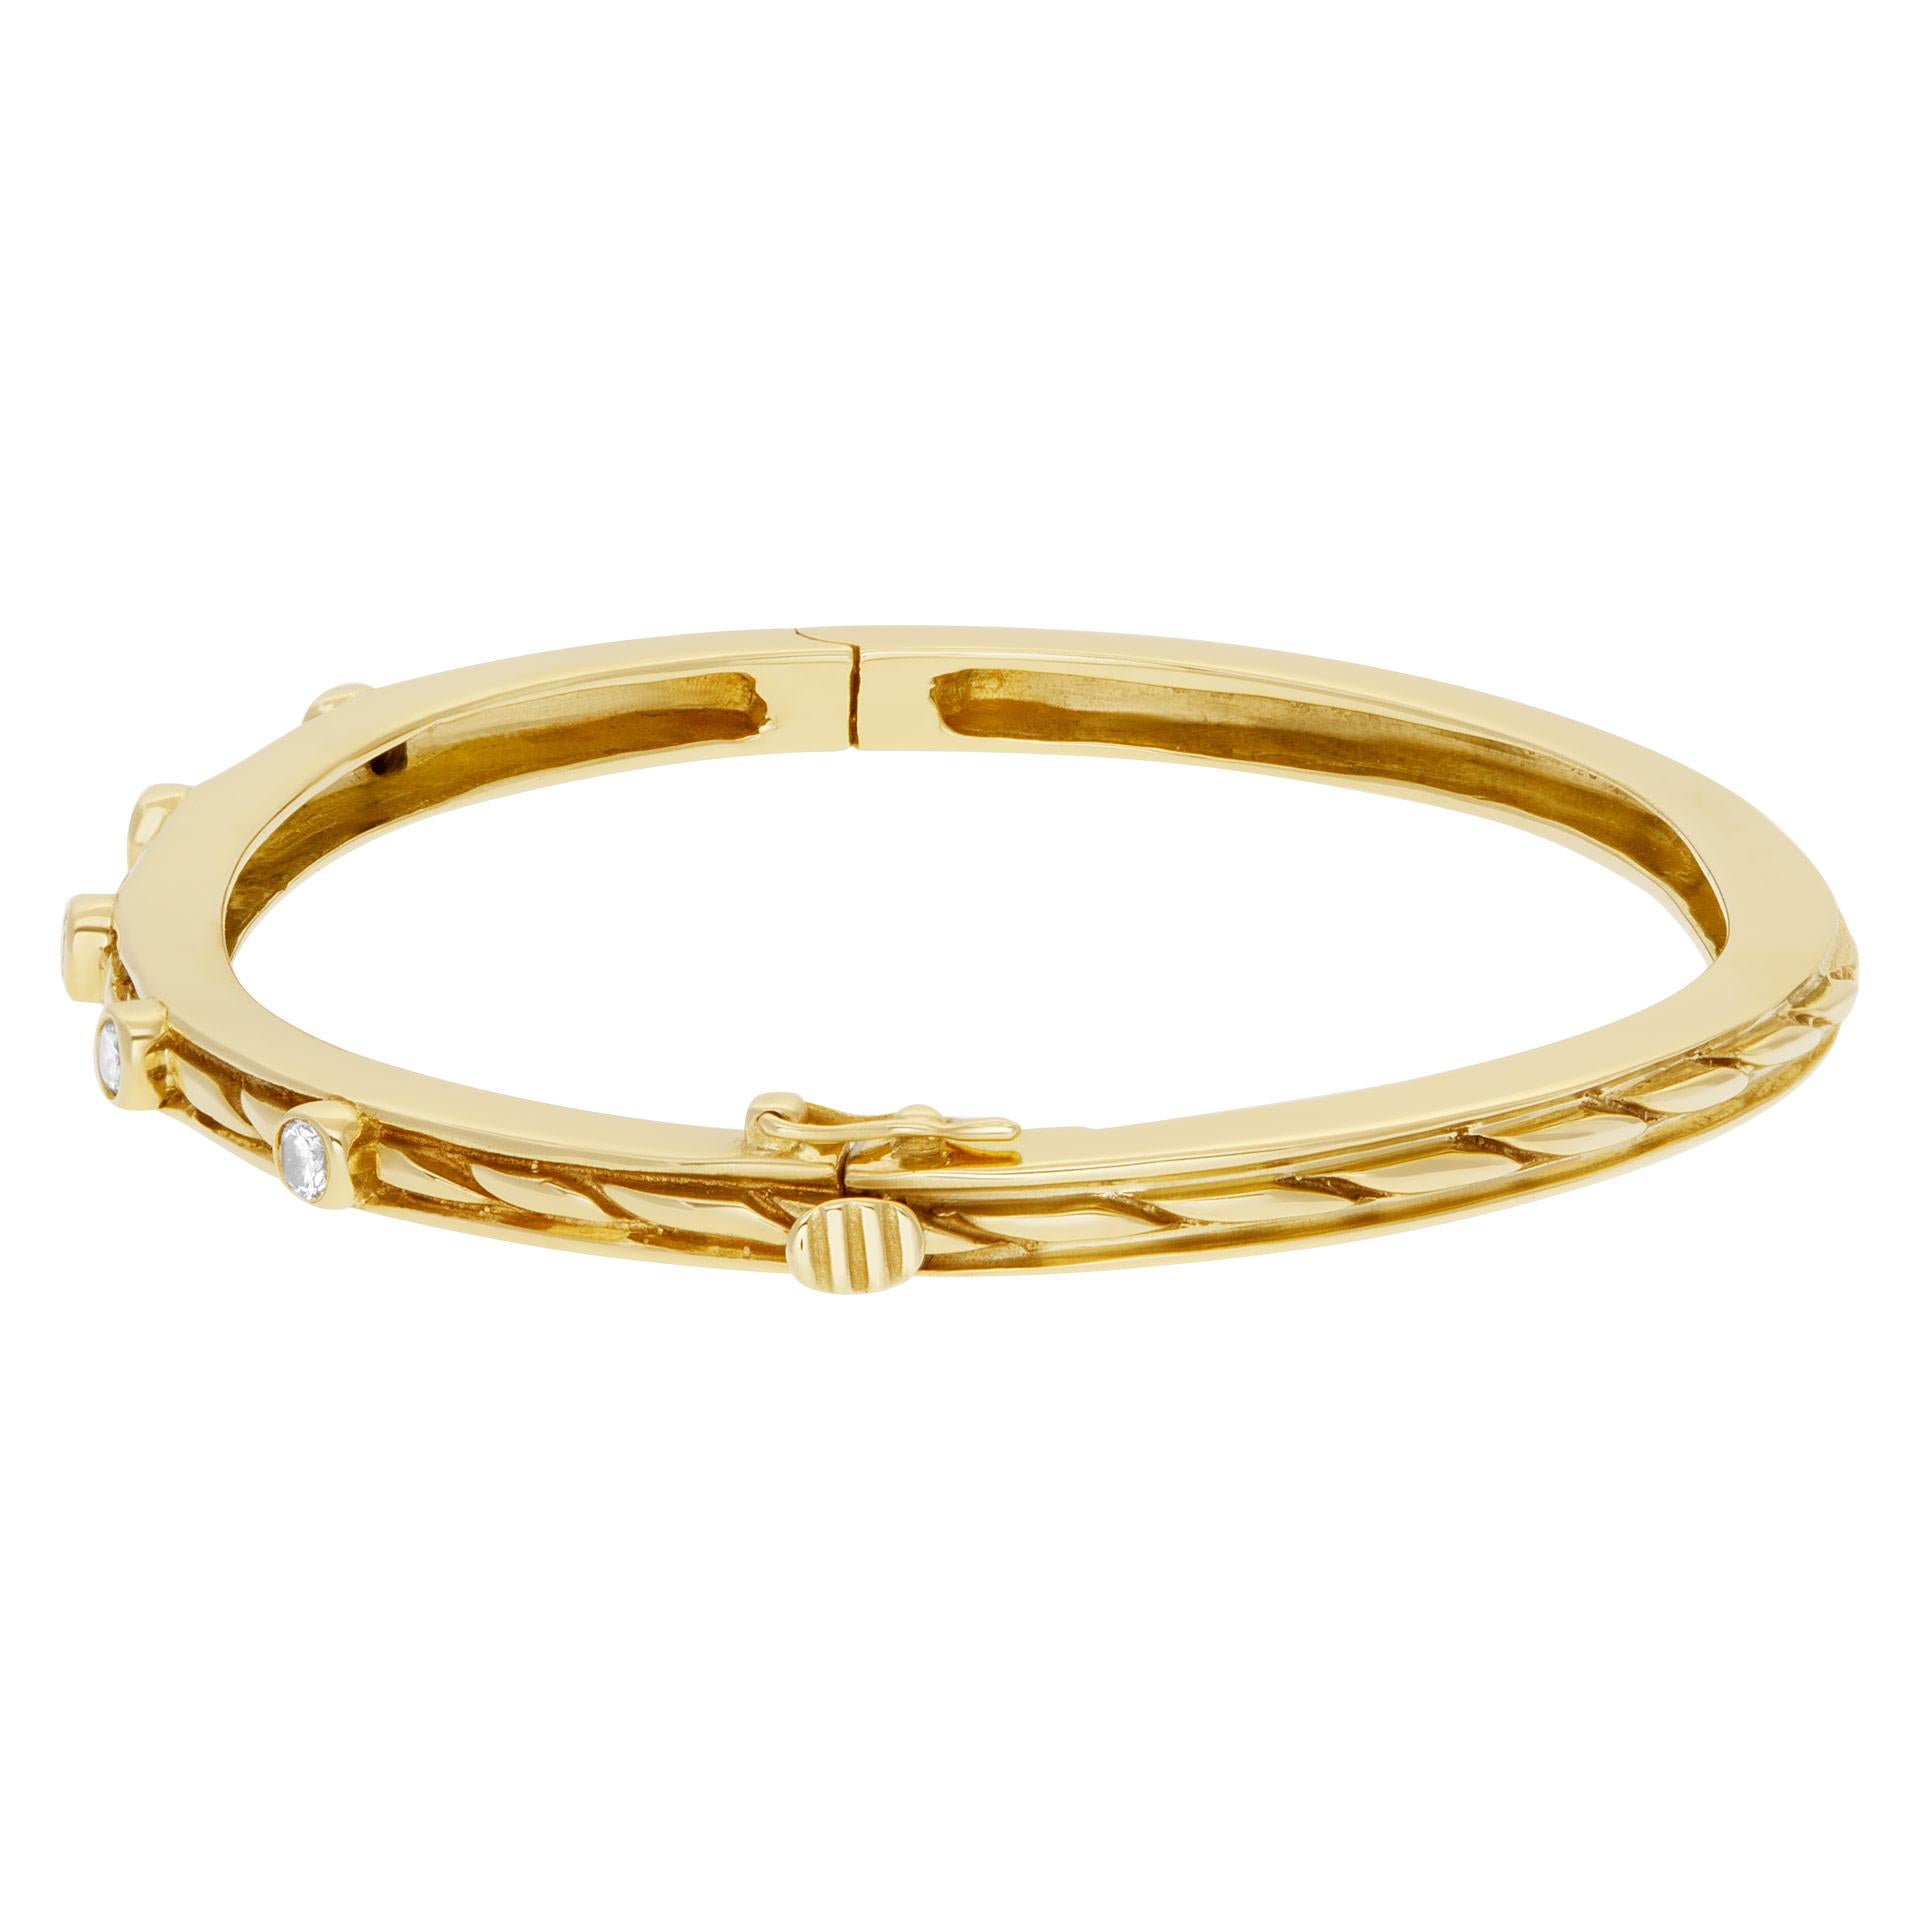 Women's Bangle Bracelet with 5 Swirls in 14k Yellow Gold and Diamonds For Sale